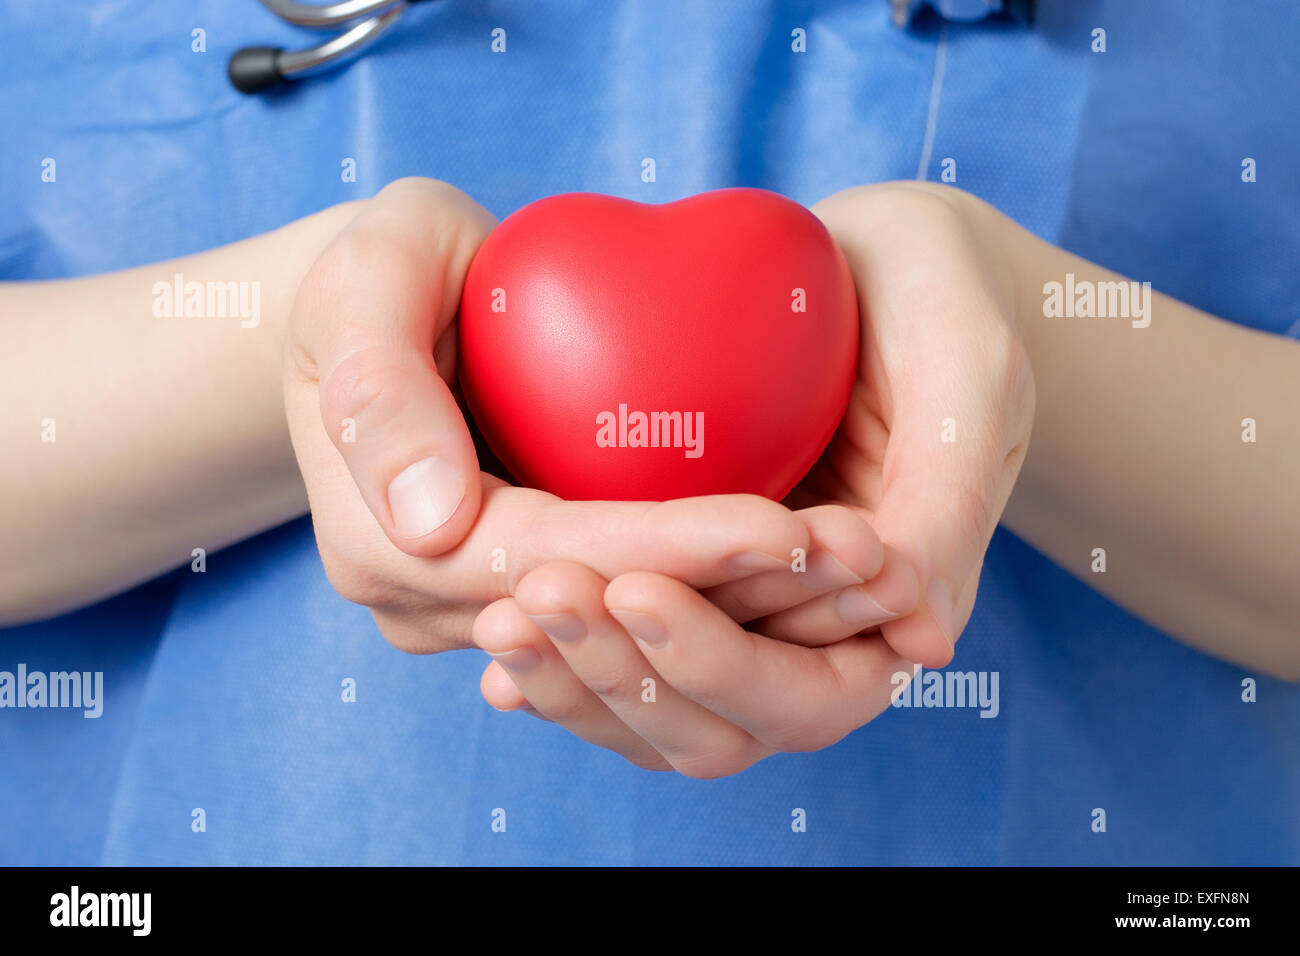 Female doctor holding a red heart shape Stock Photo